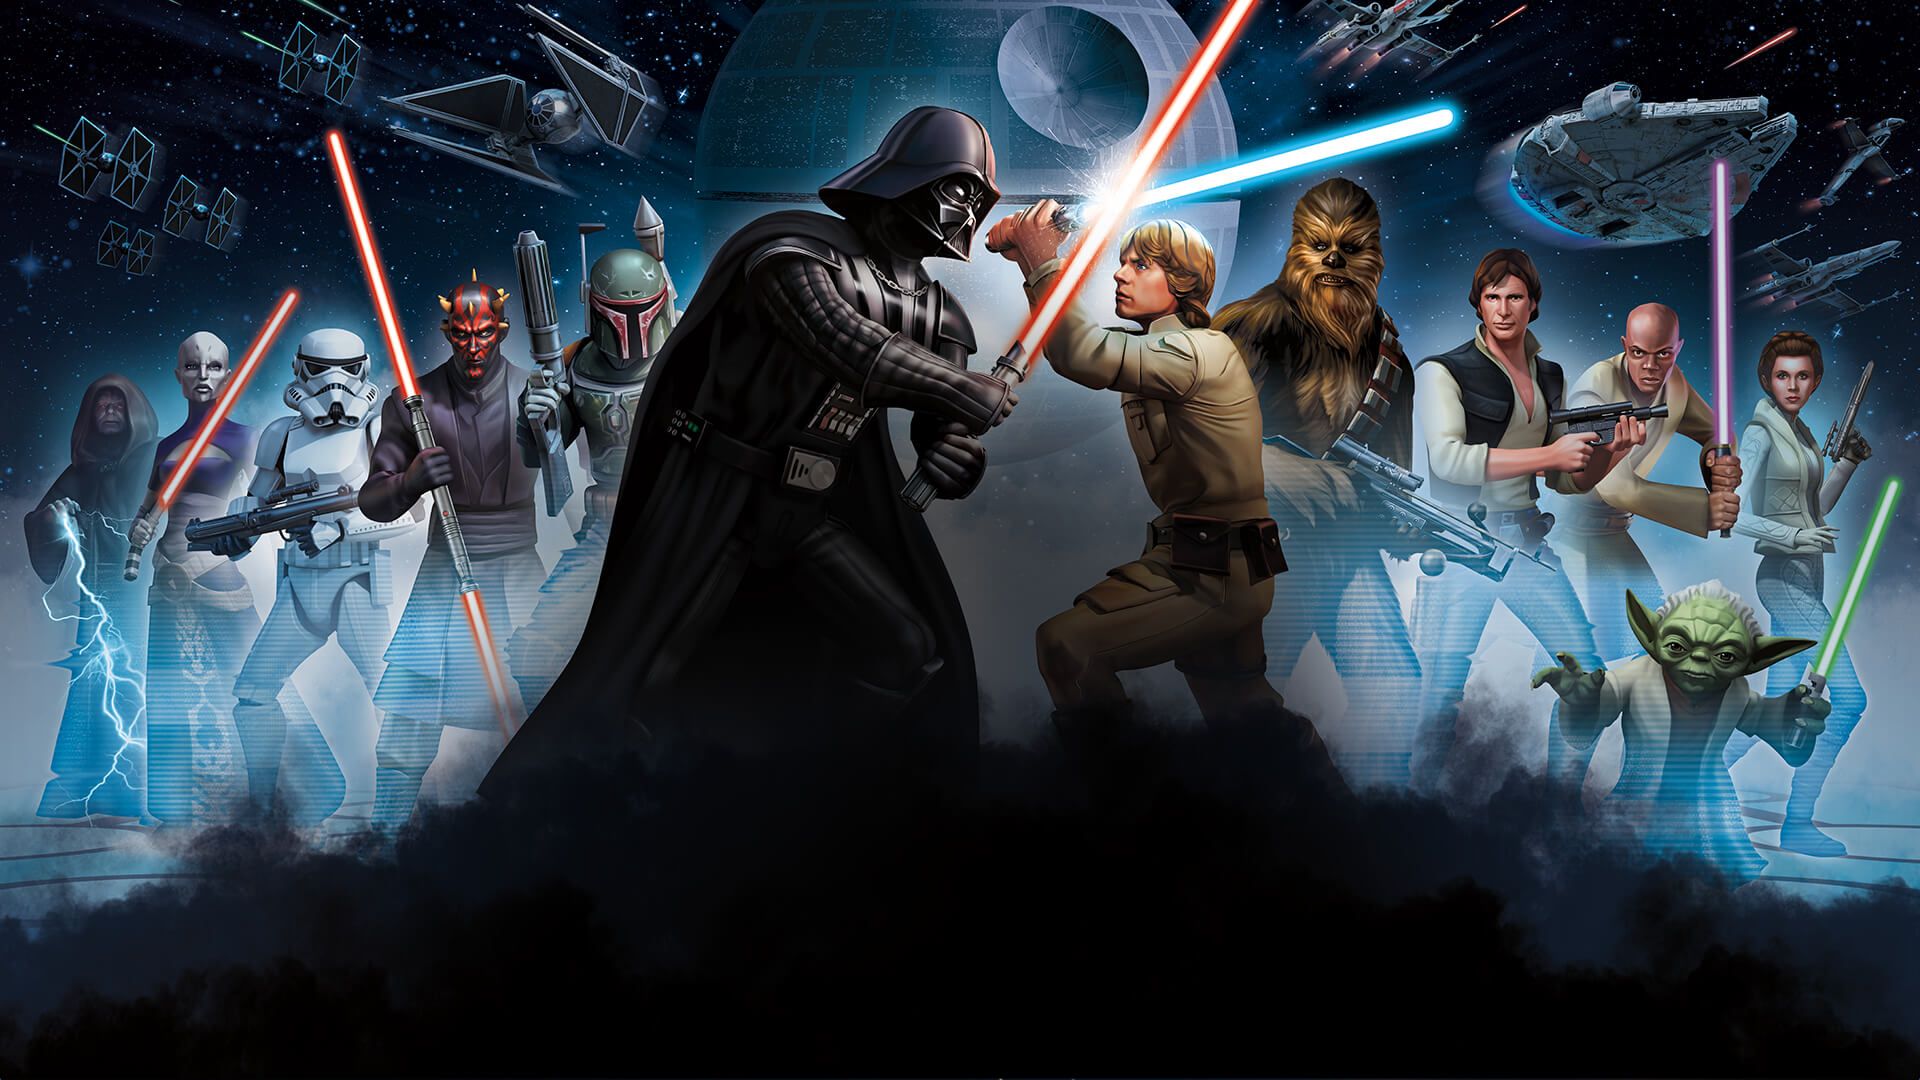 Star Wars HD Backgrounds Free download 